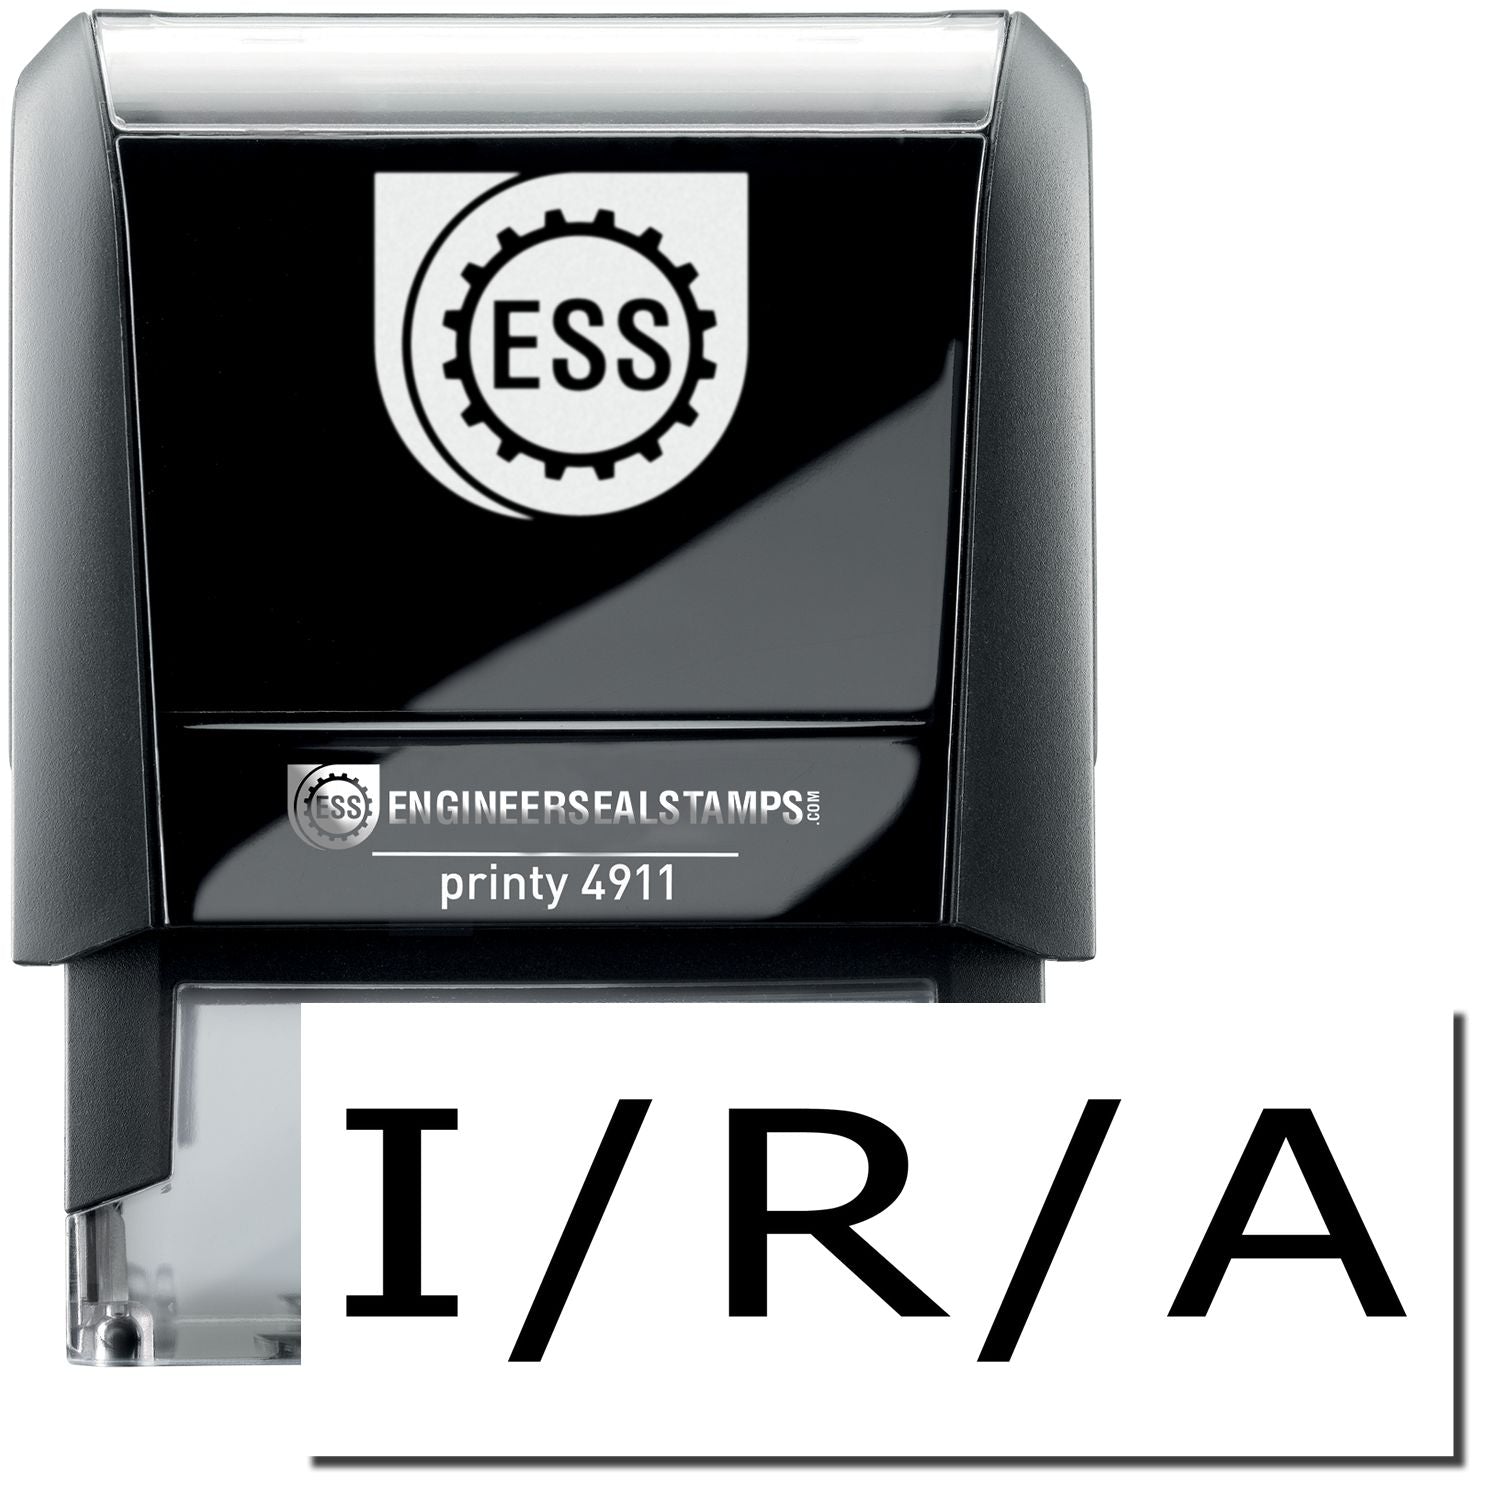 A self-inking stamp with a stamped image showing how the text "I / R / A" is displayed after stamping.